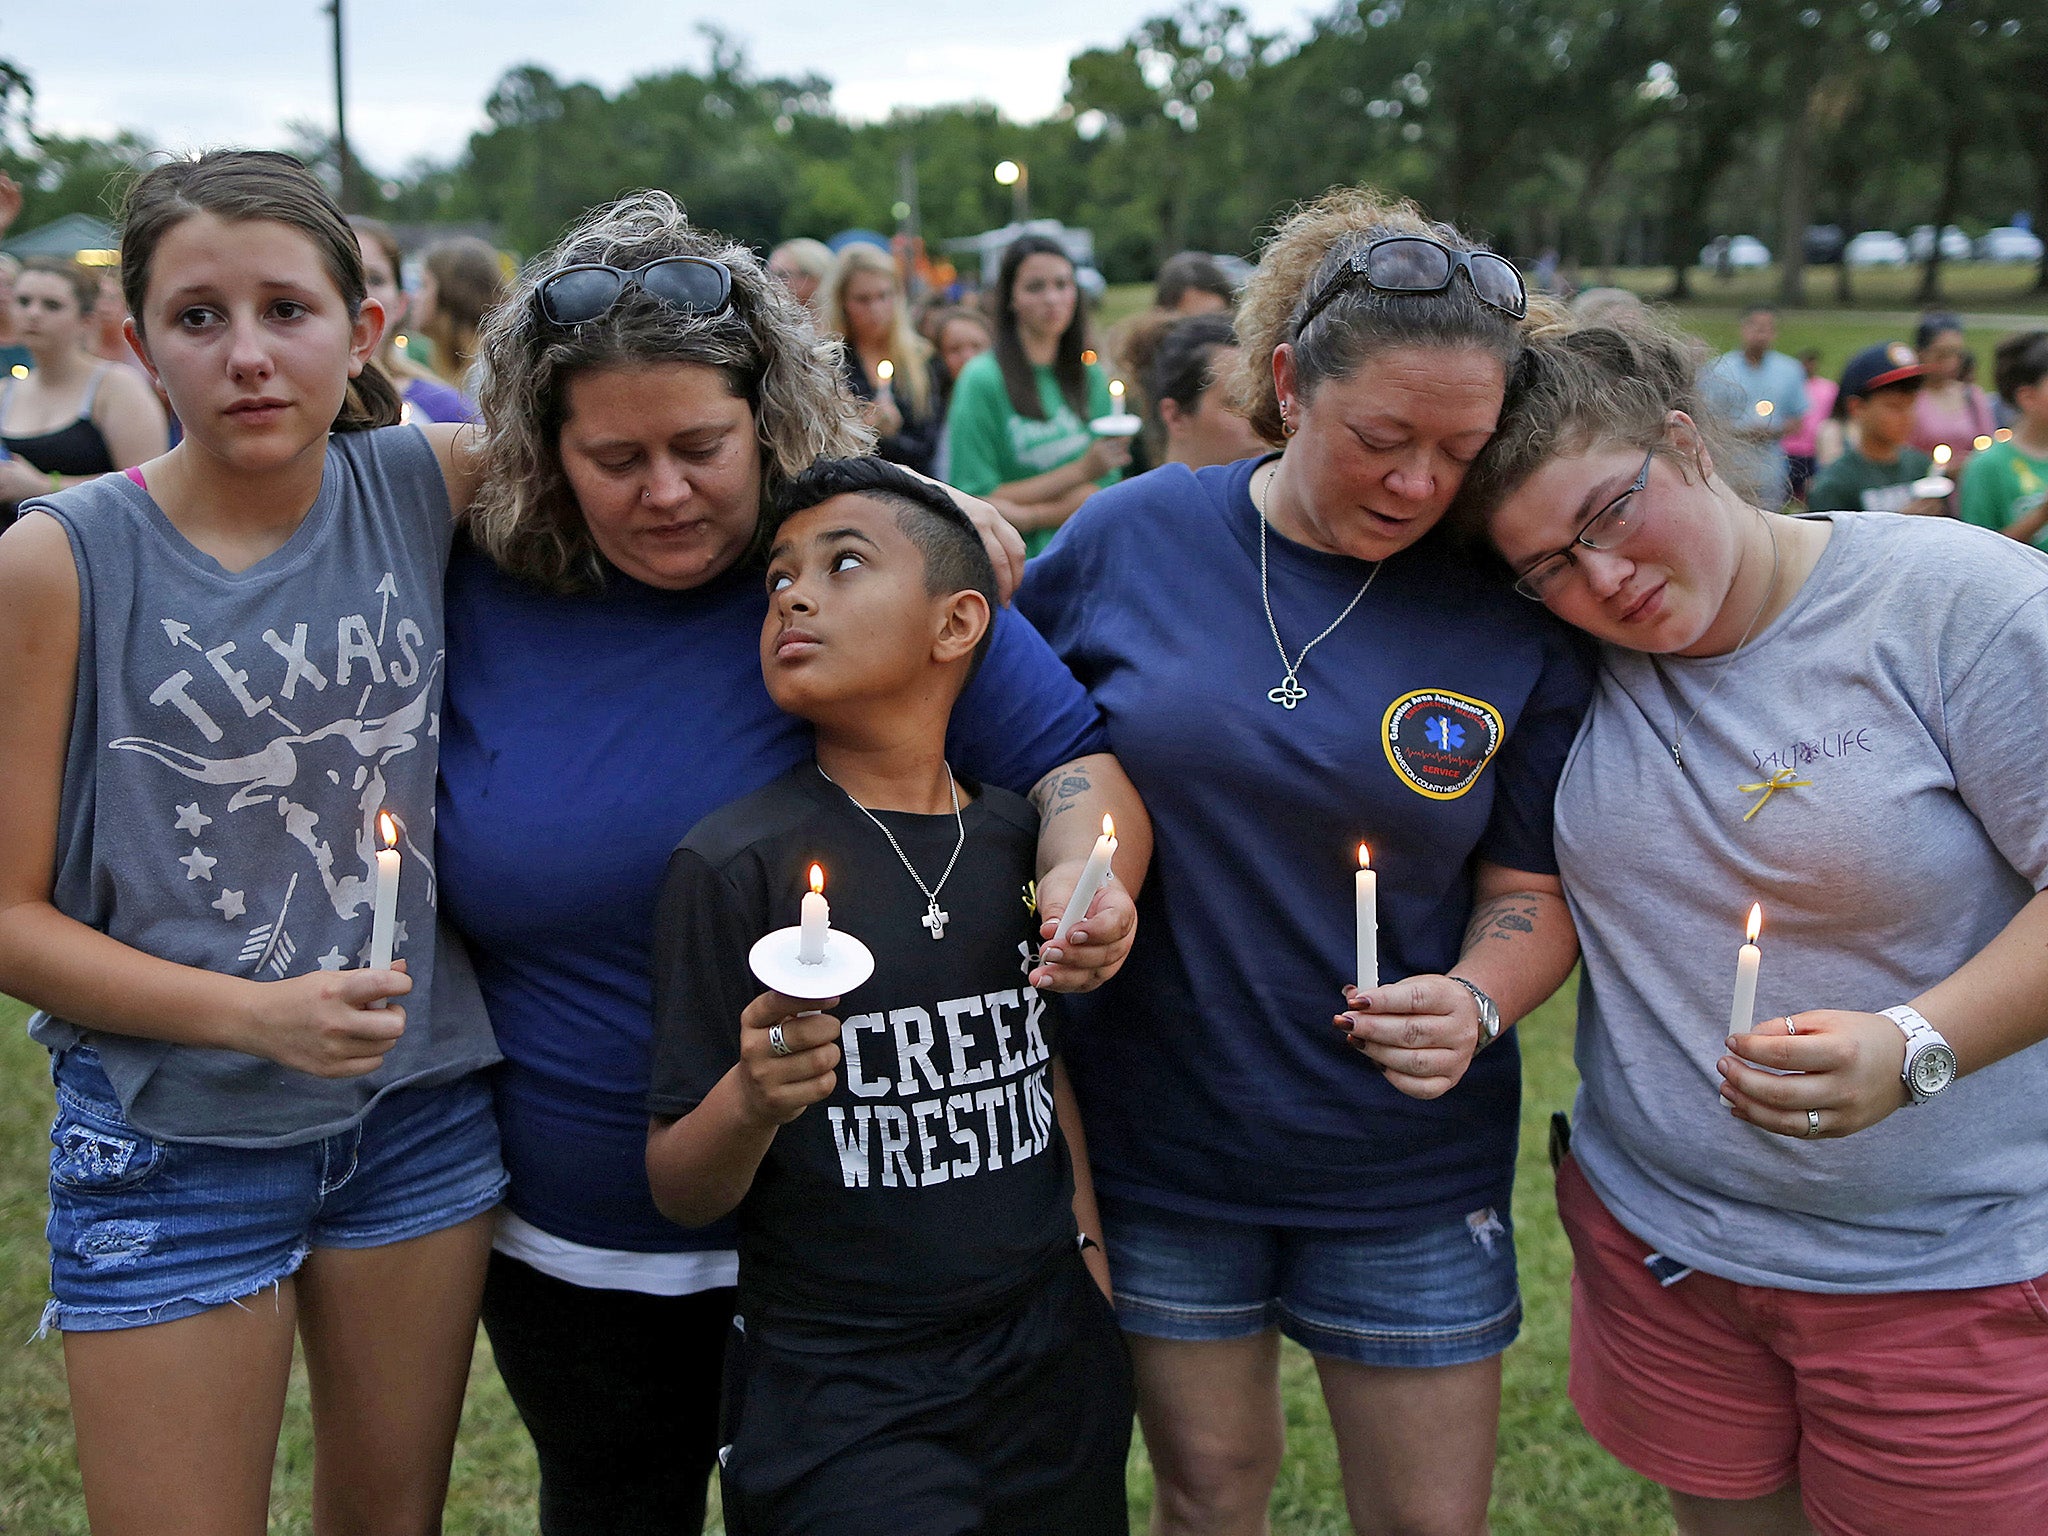 Mourners pray during a vigil in memory of the victims killed in the Santa Fe shooting